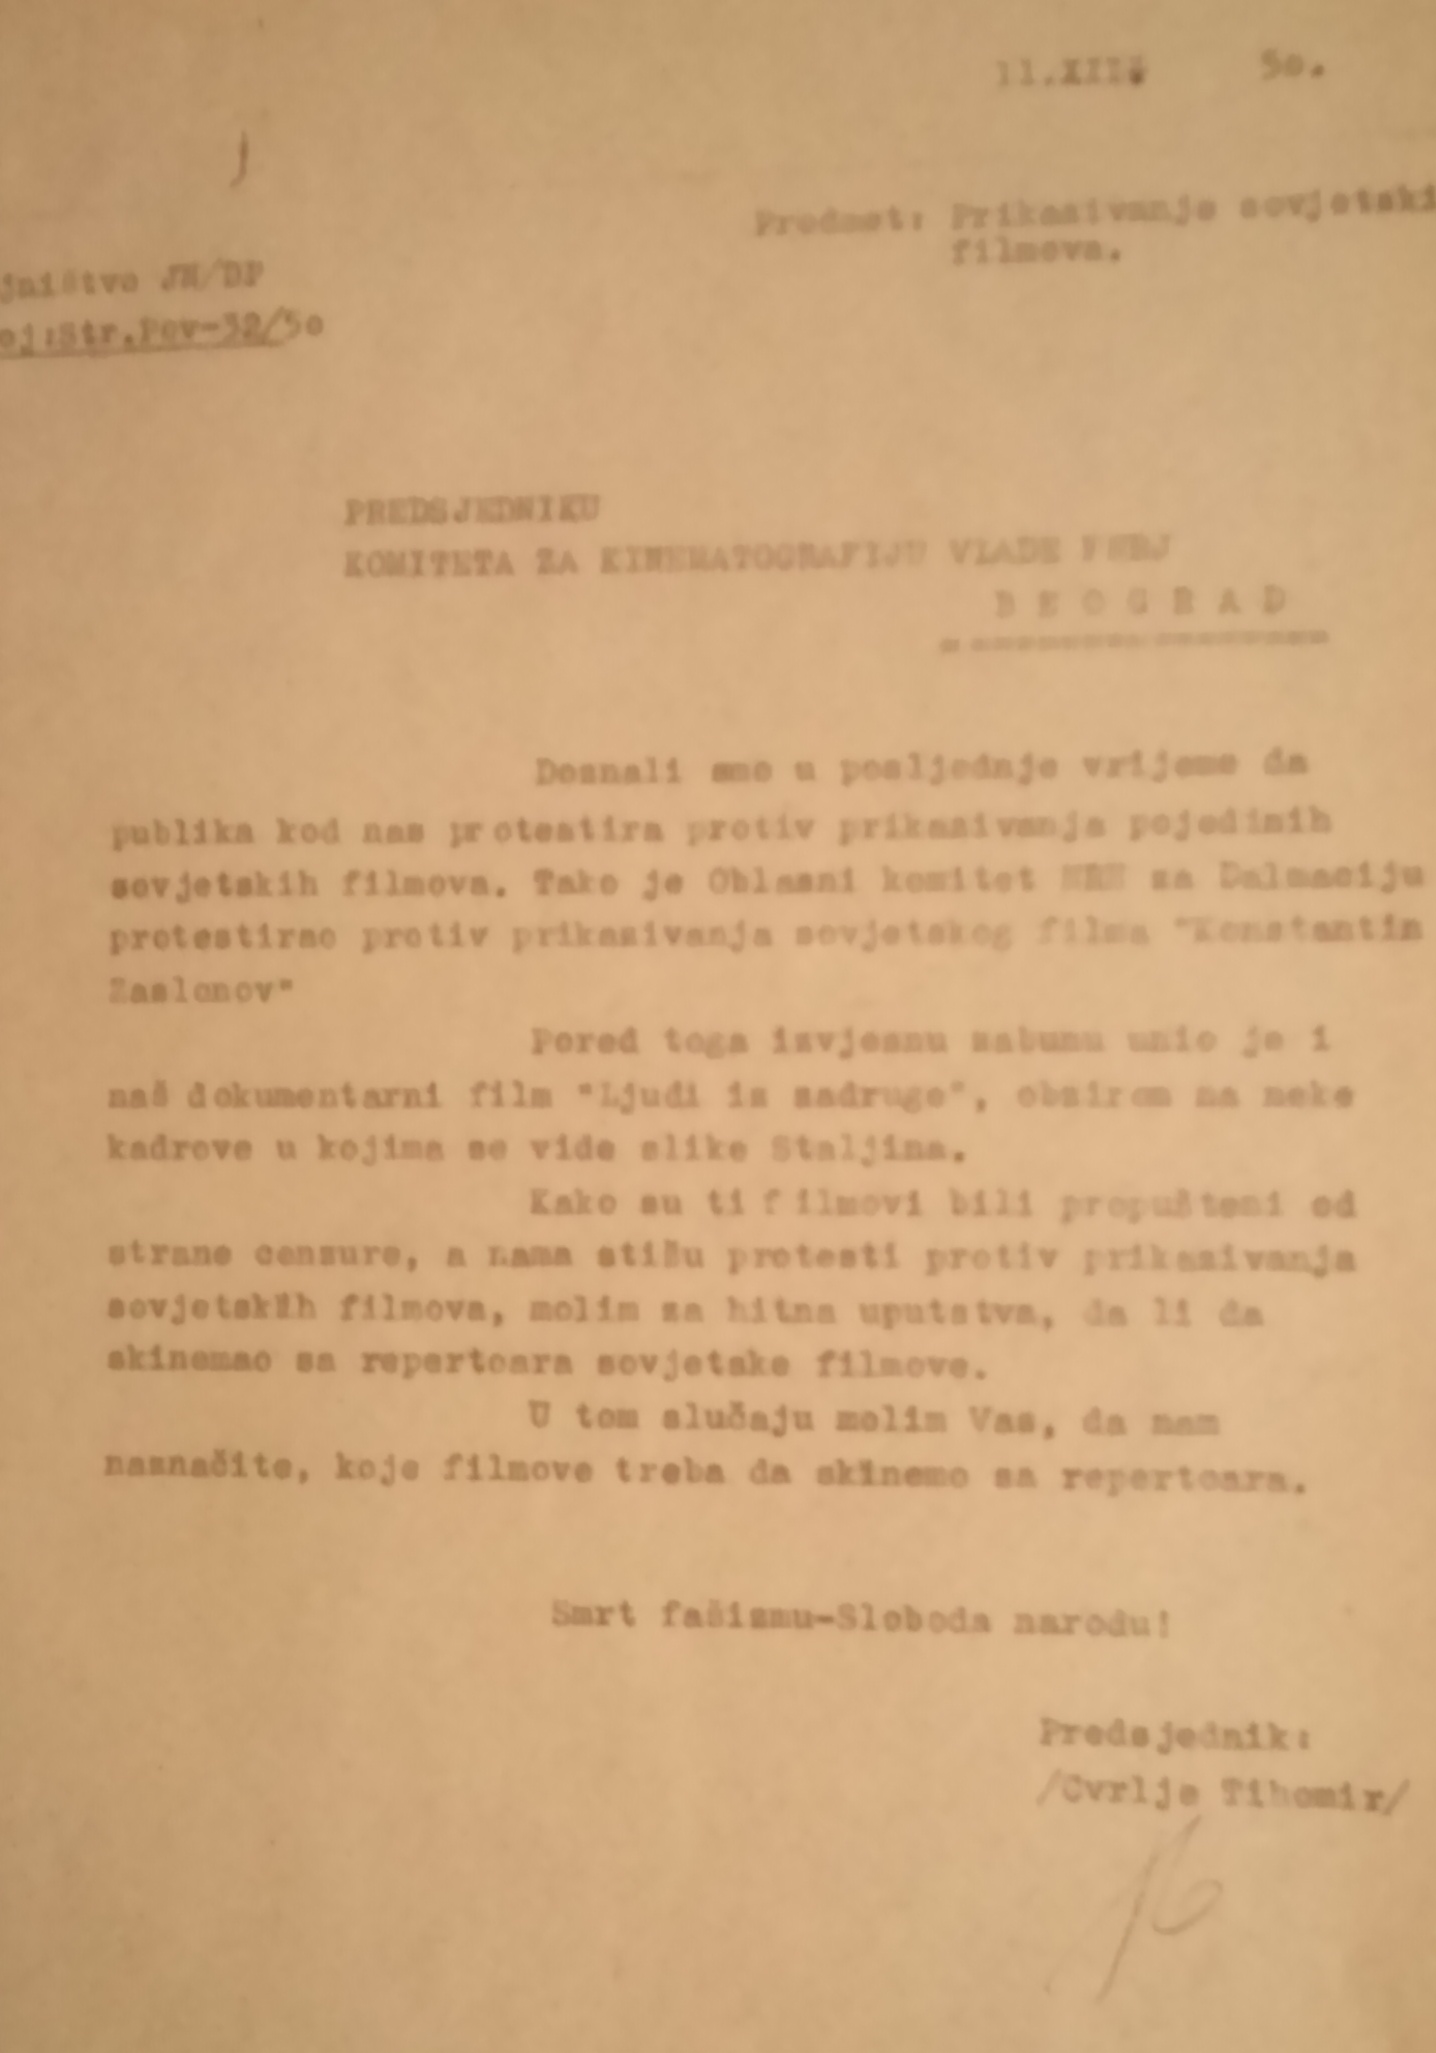 Request for instructions on the screening of Soviet movies in Croatian cinemas. 11 December 1950. Archival document